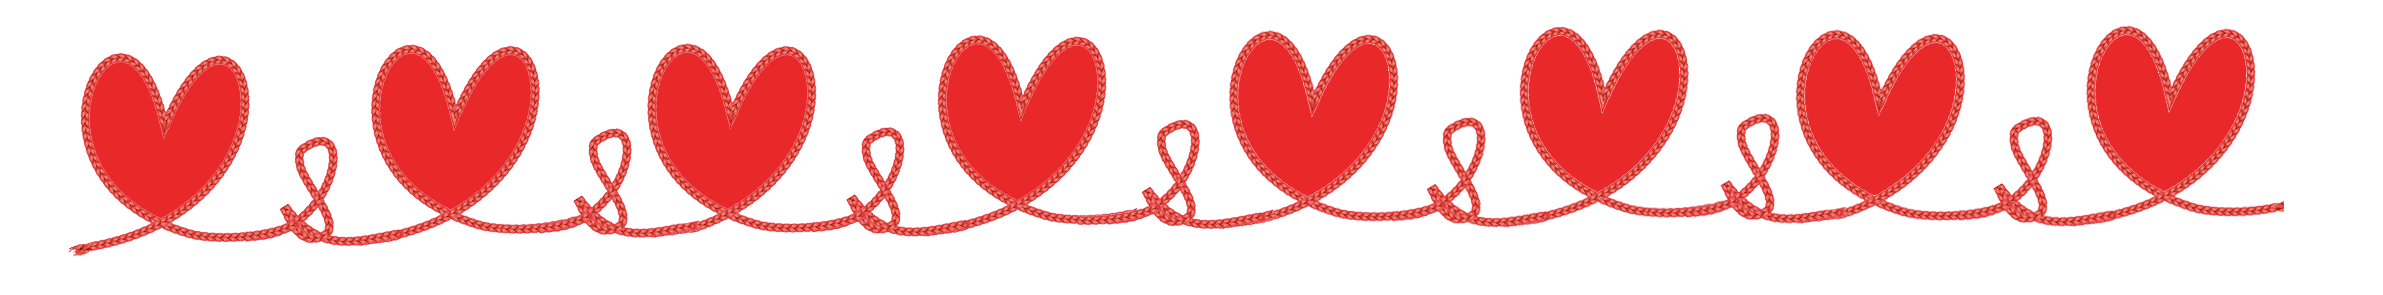 red heart border of rope